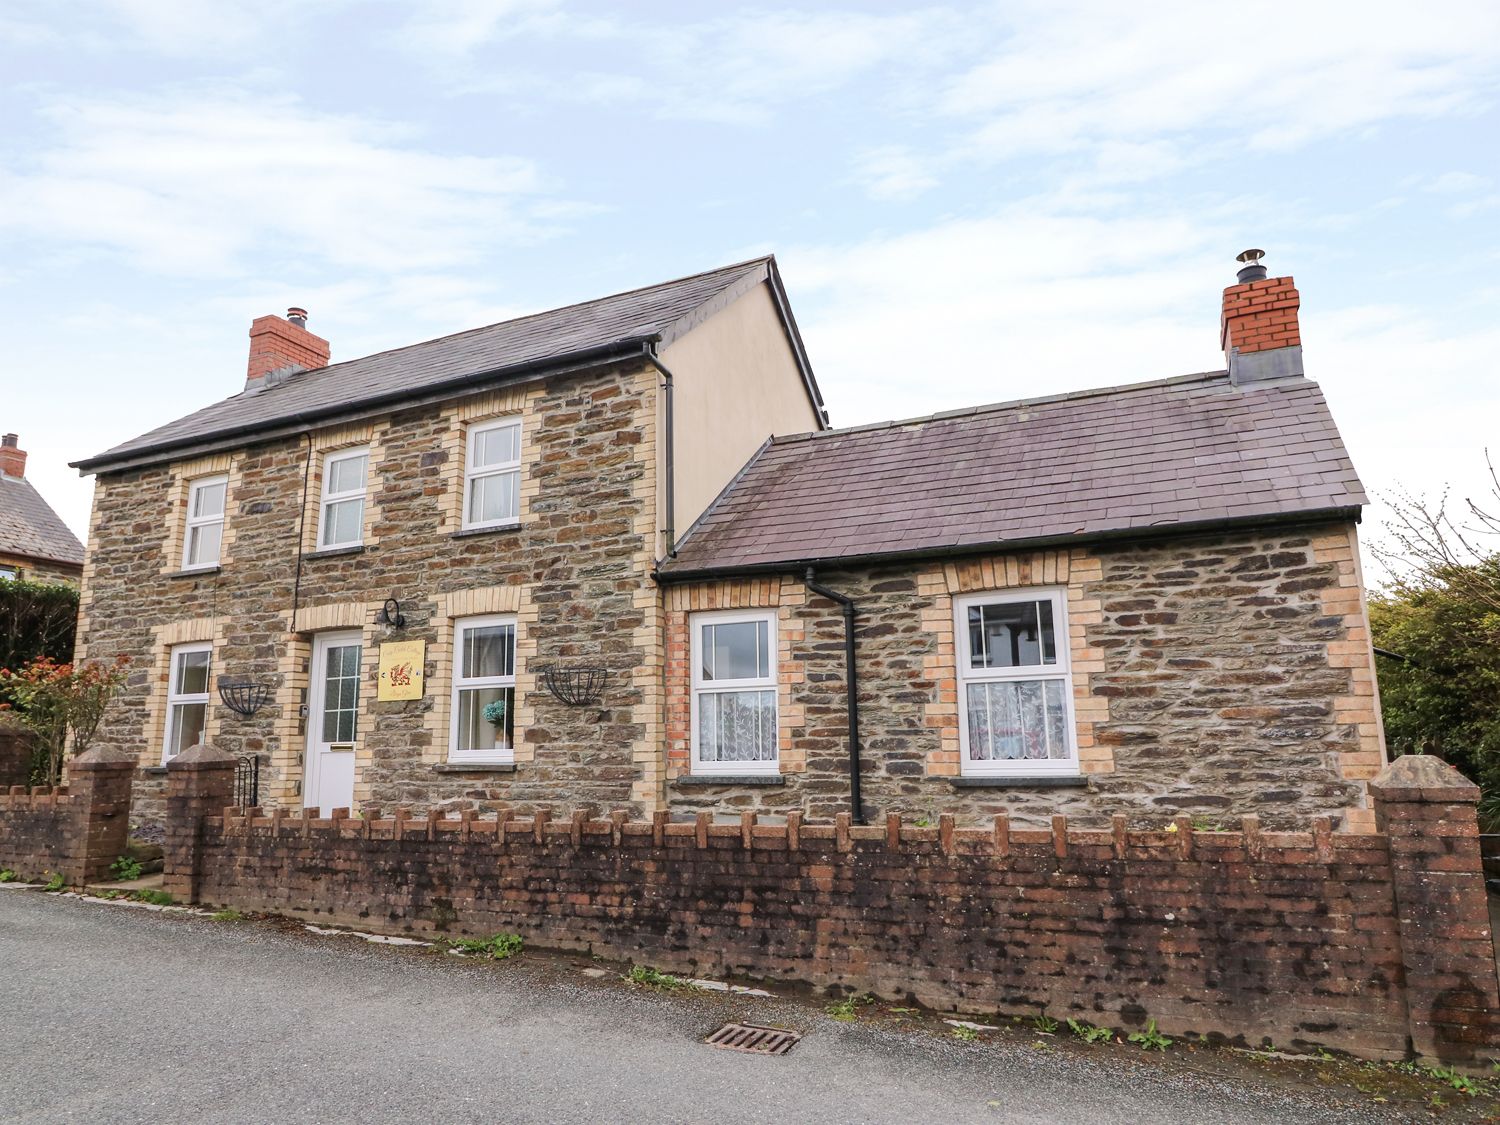 Cozy Cwtch Cottage - South Wales - 935330 - photo 1